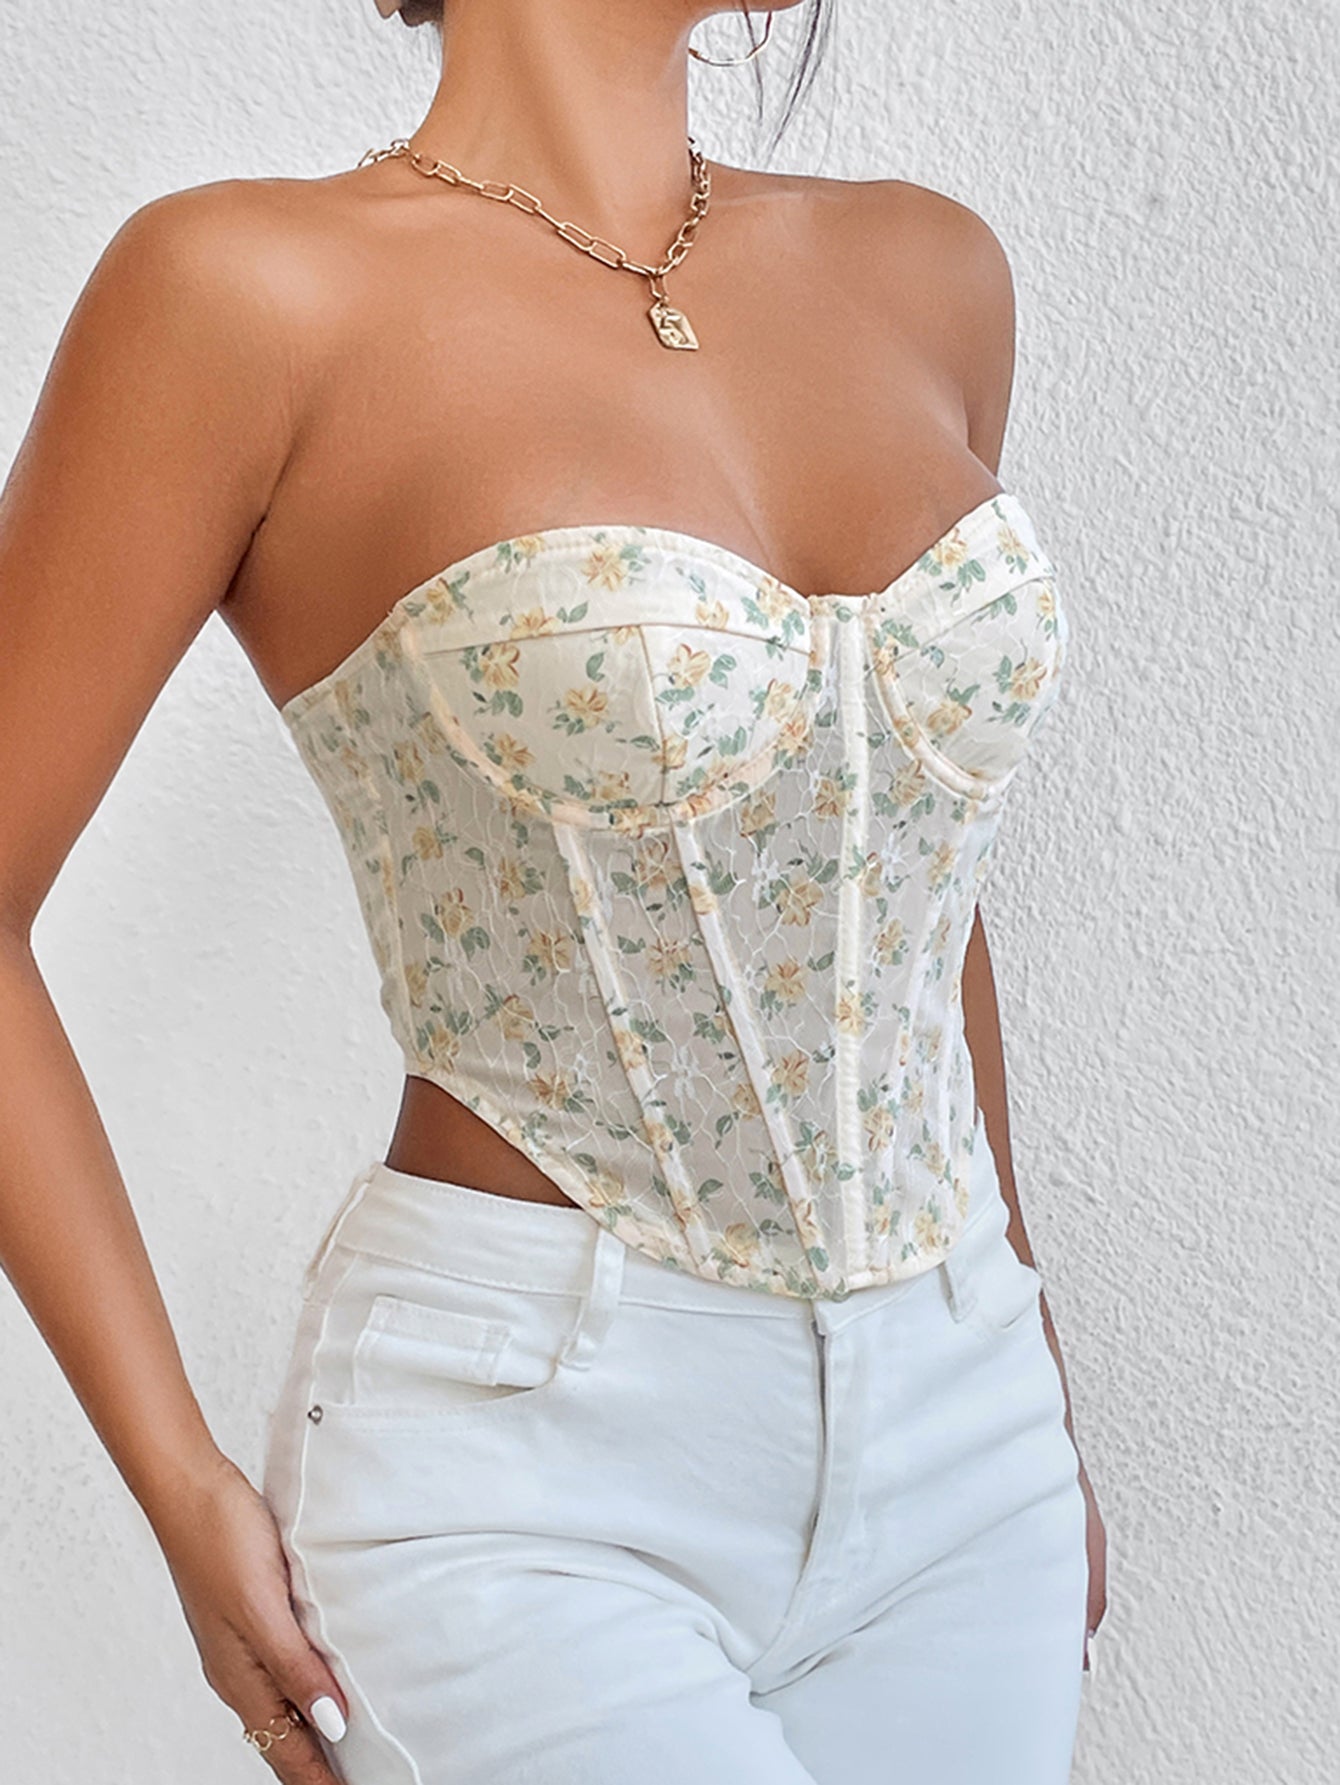 Strapless Corset Bustier in Blossom